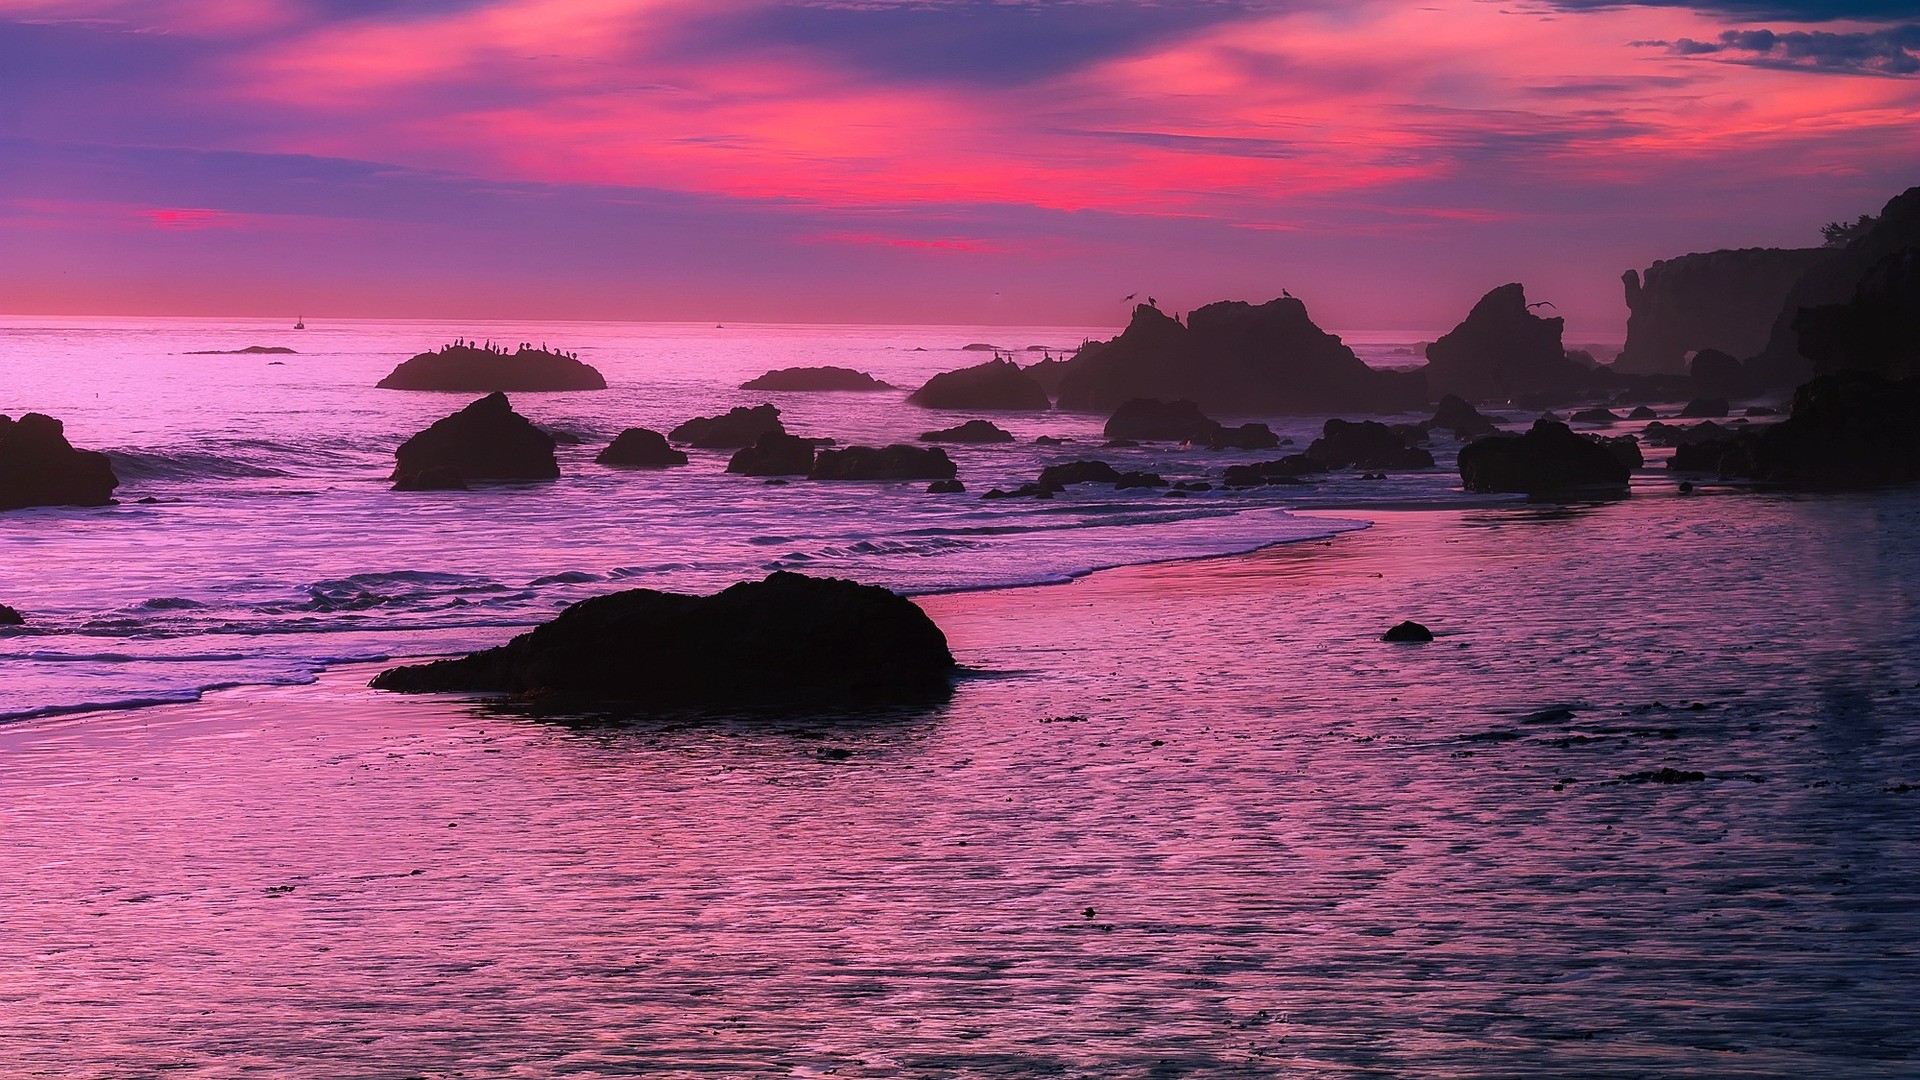 Pink Dye Experiment to Reveal Mysteries of Coastal Ocean Dynamics